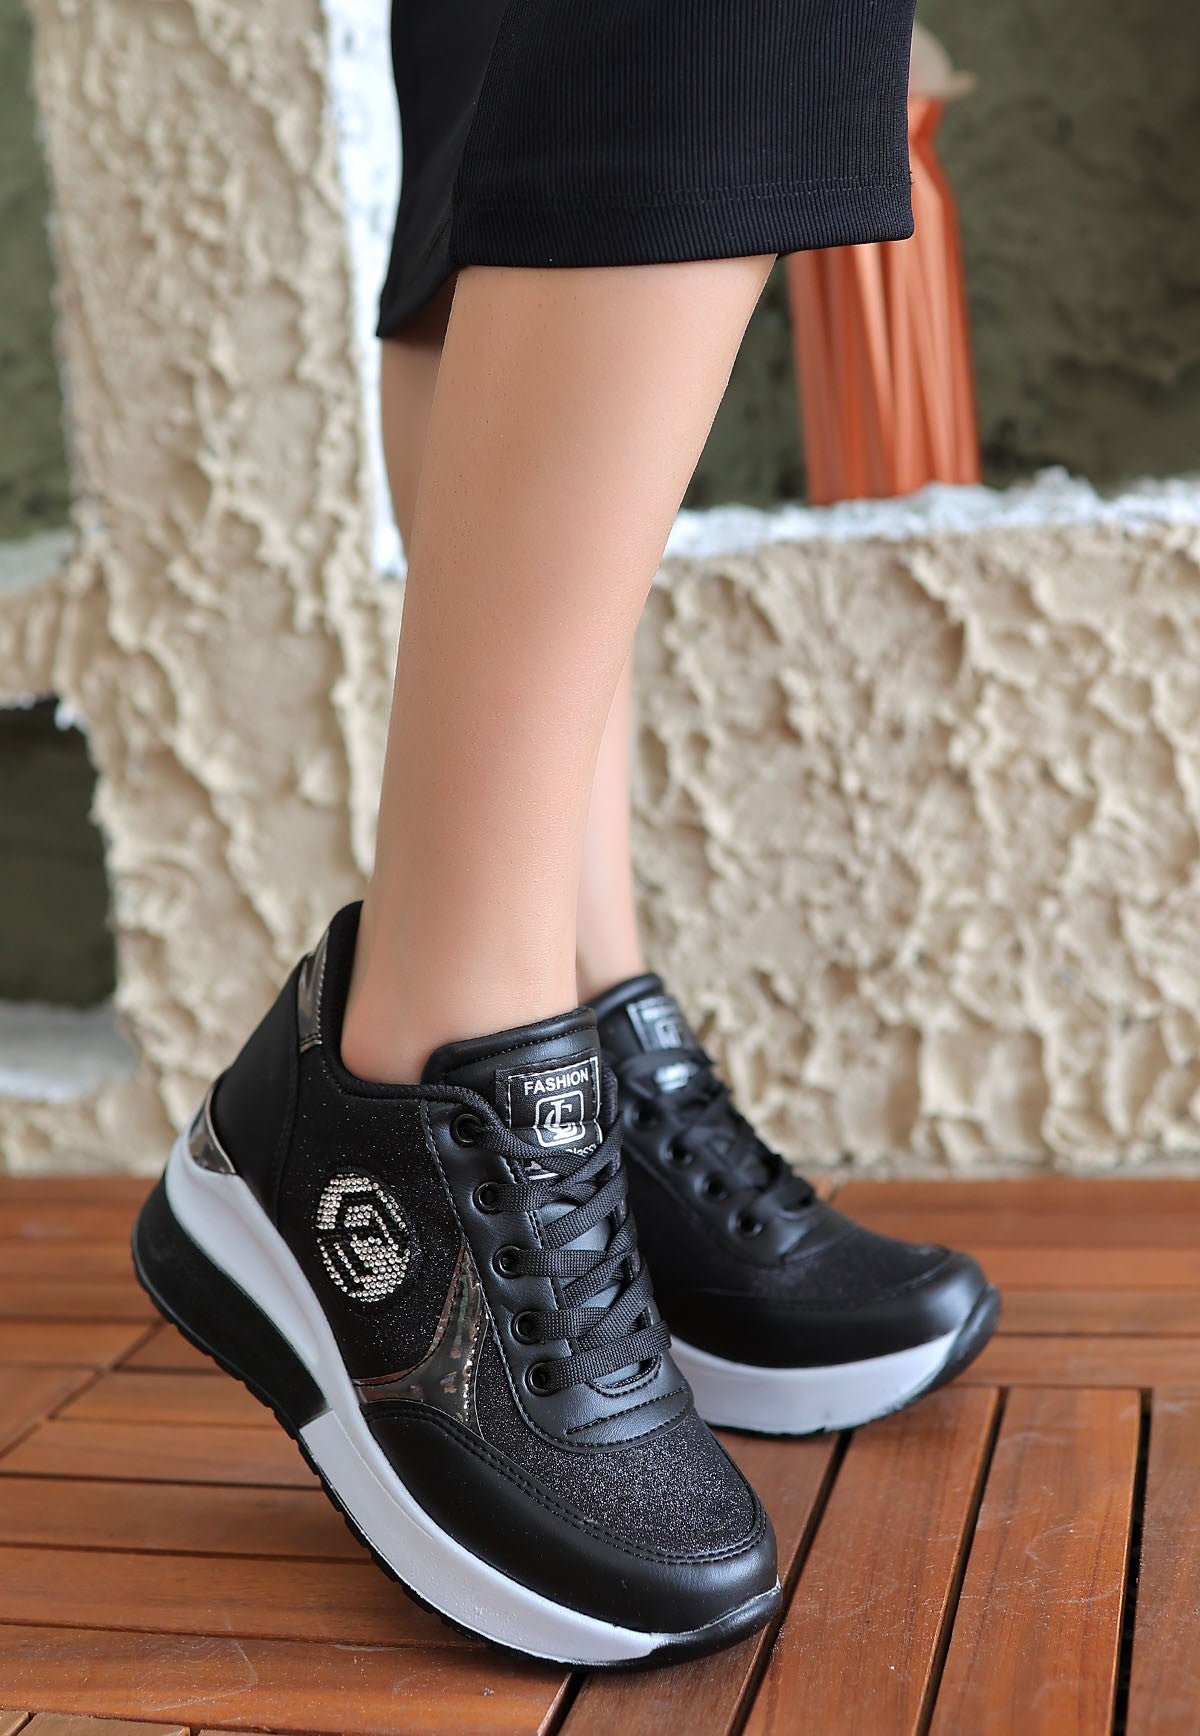 Women's Black Leather Lace-Up Sports Shoes